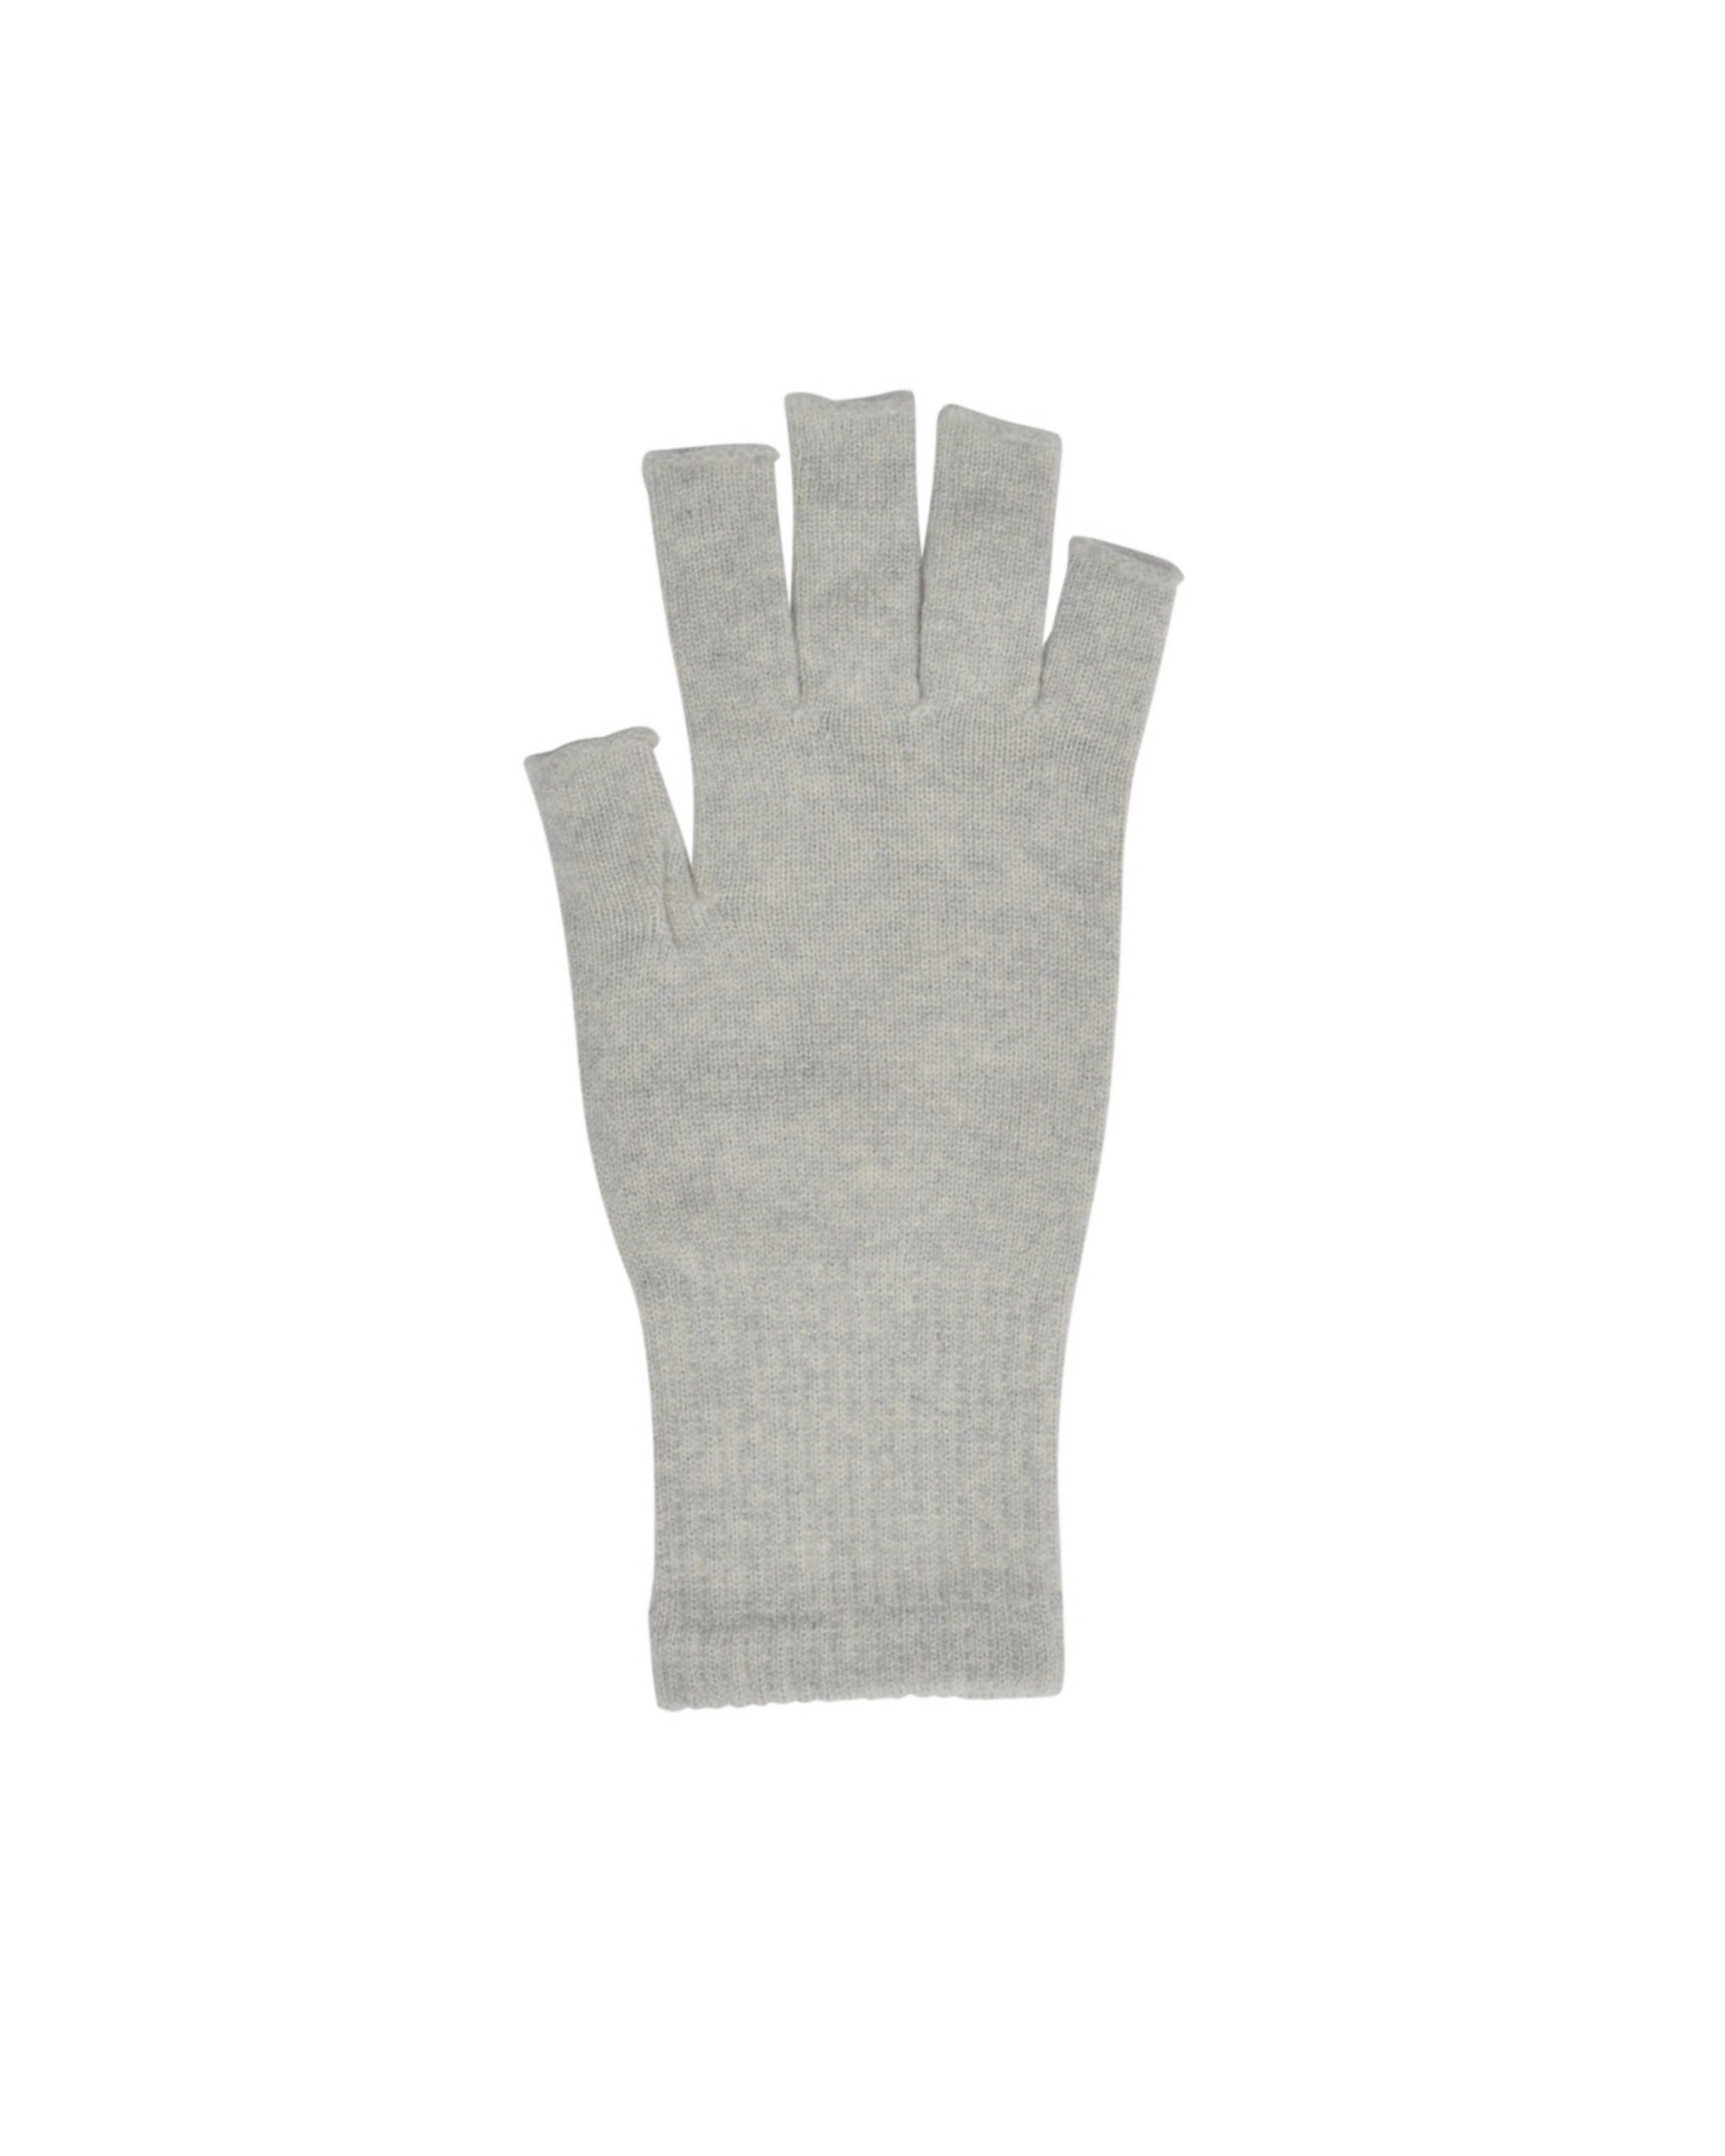 wool gloves made in Japan